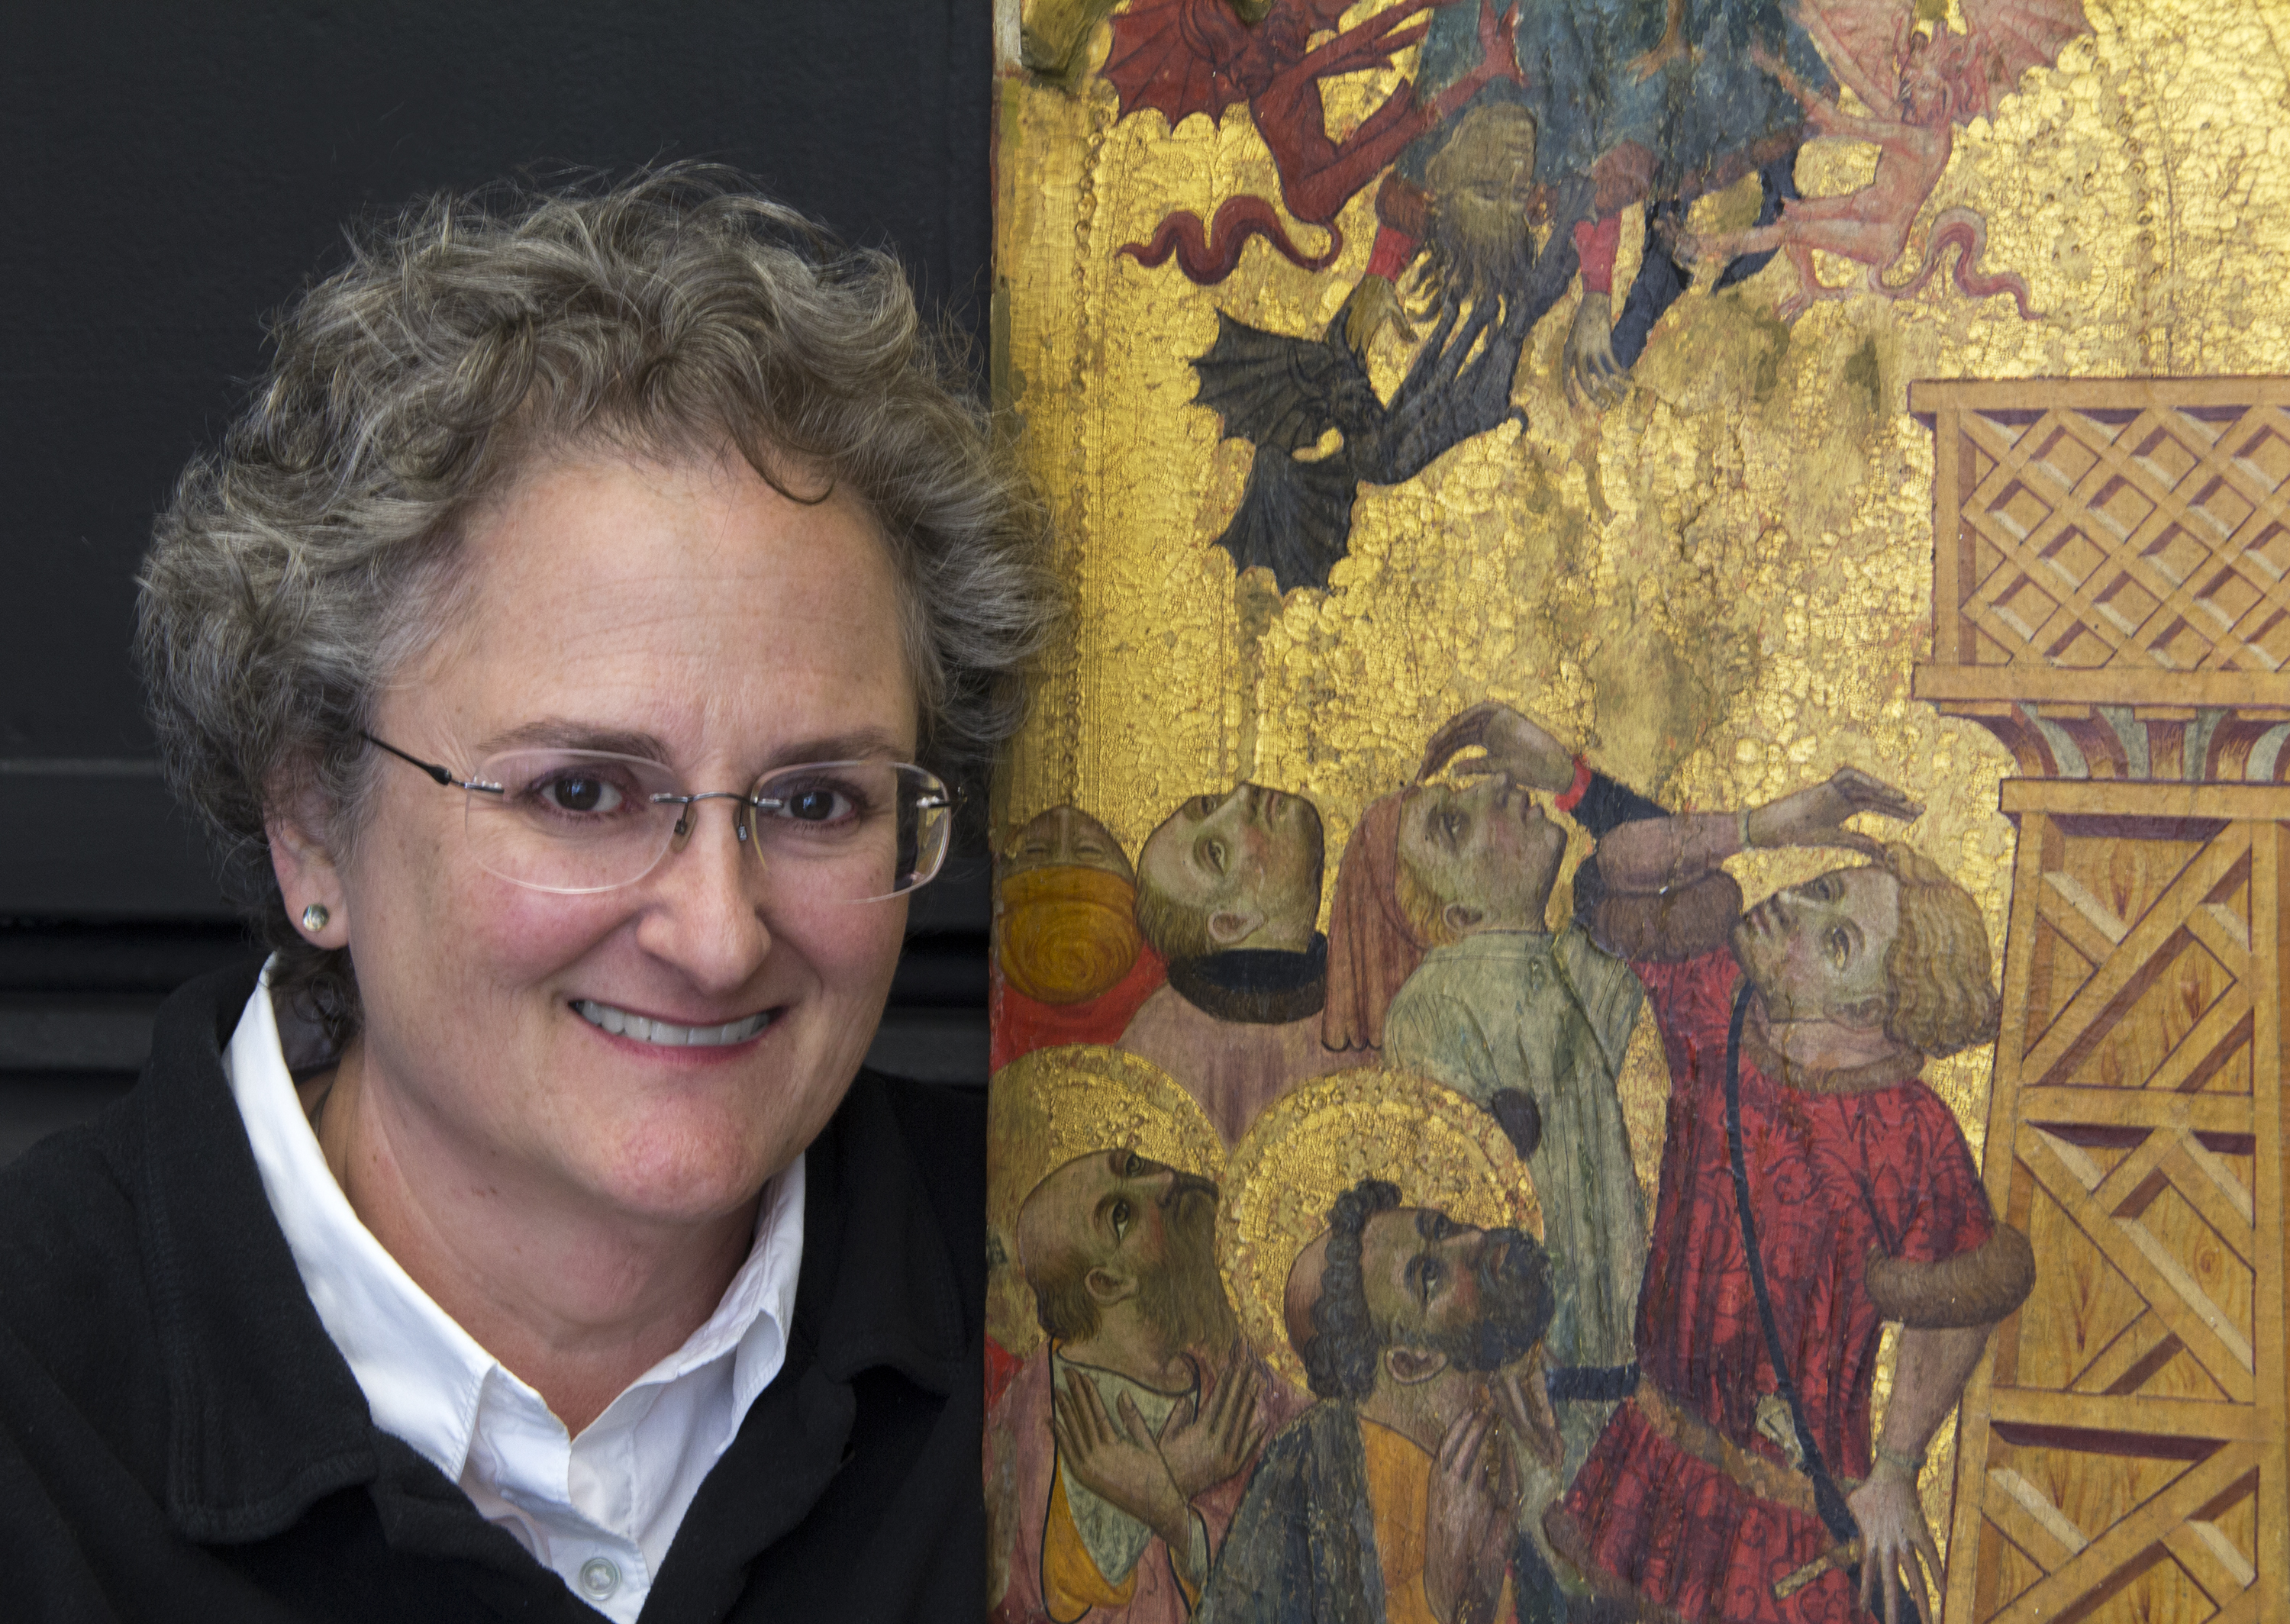 Serena Urry, Chief Conservator of the Cincinnati Art Museum, has worked on a number of paintings for the Dayton Art Institute. She will speak at the DAI on July 24. CONTRIBUTED